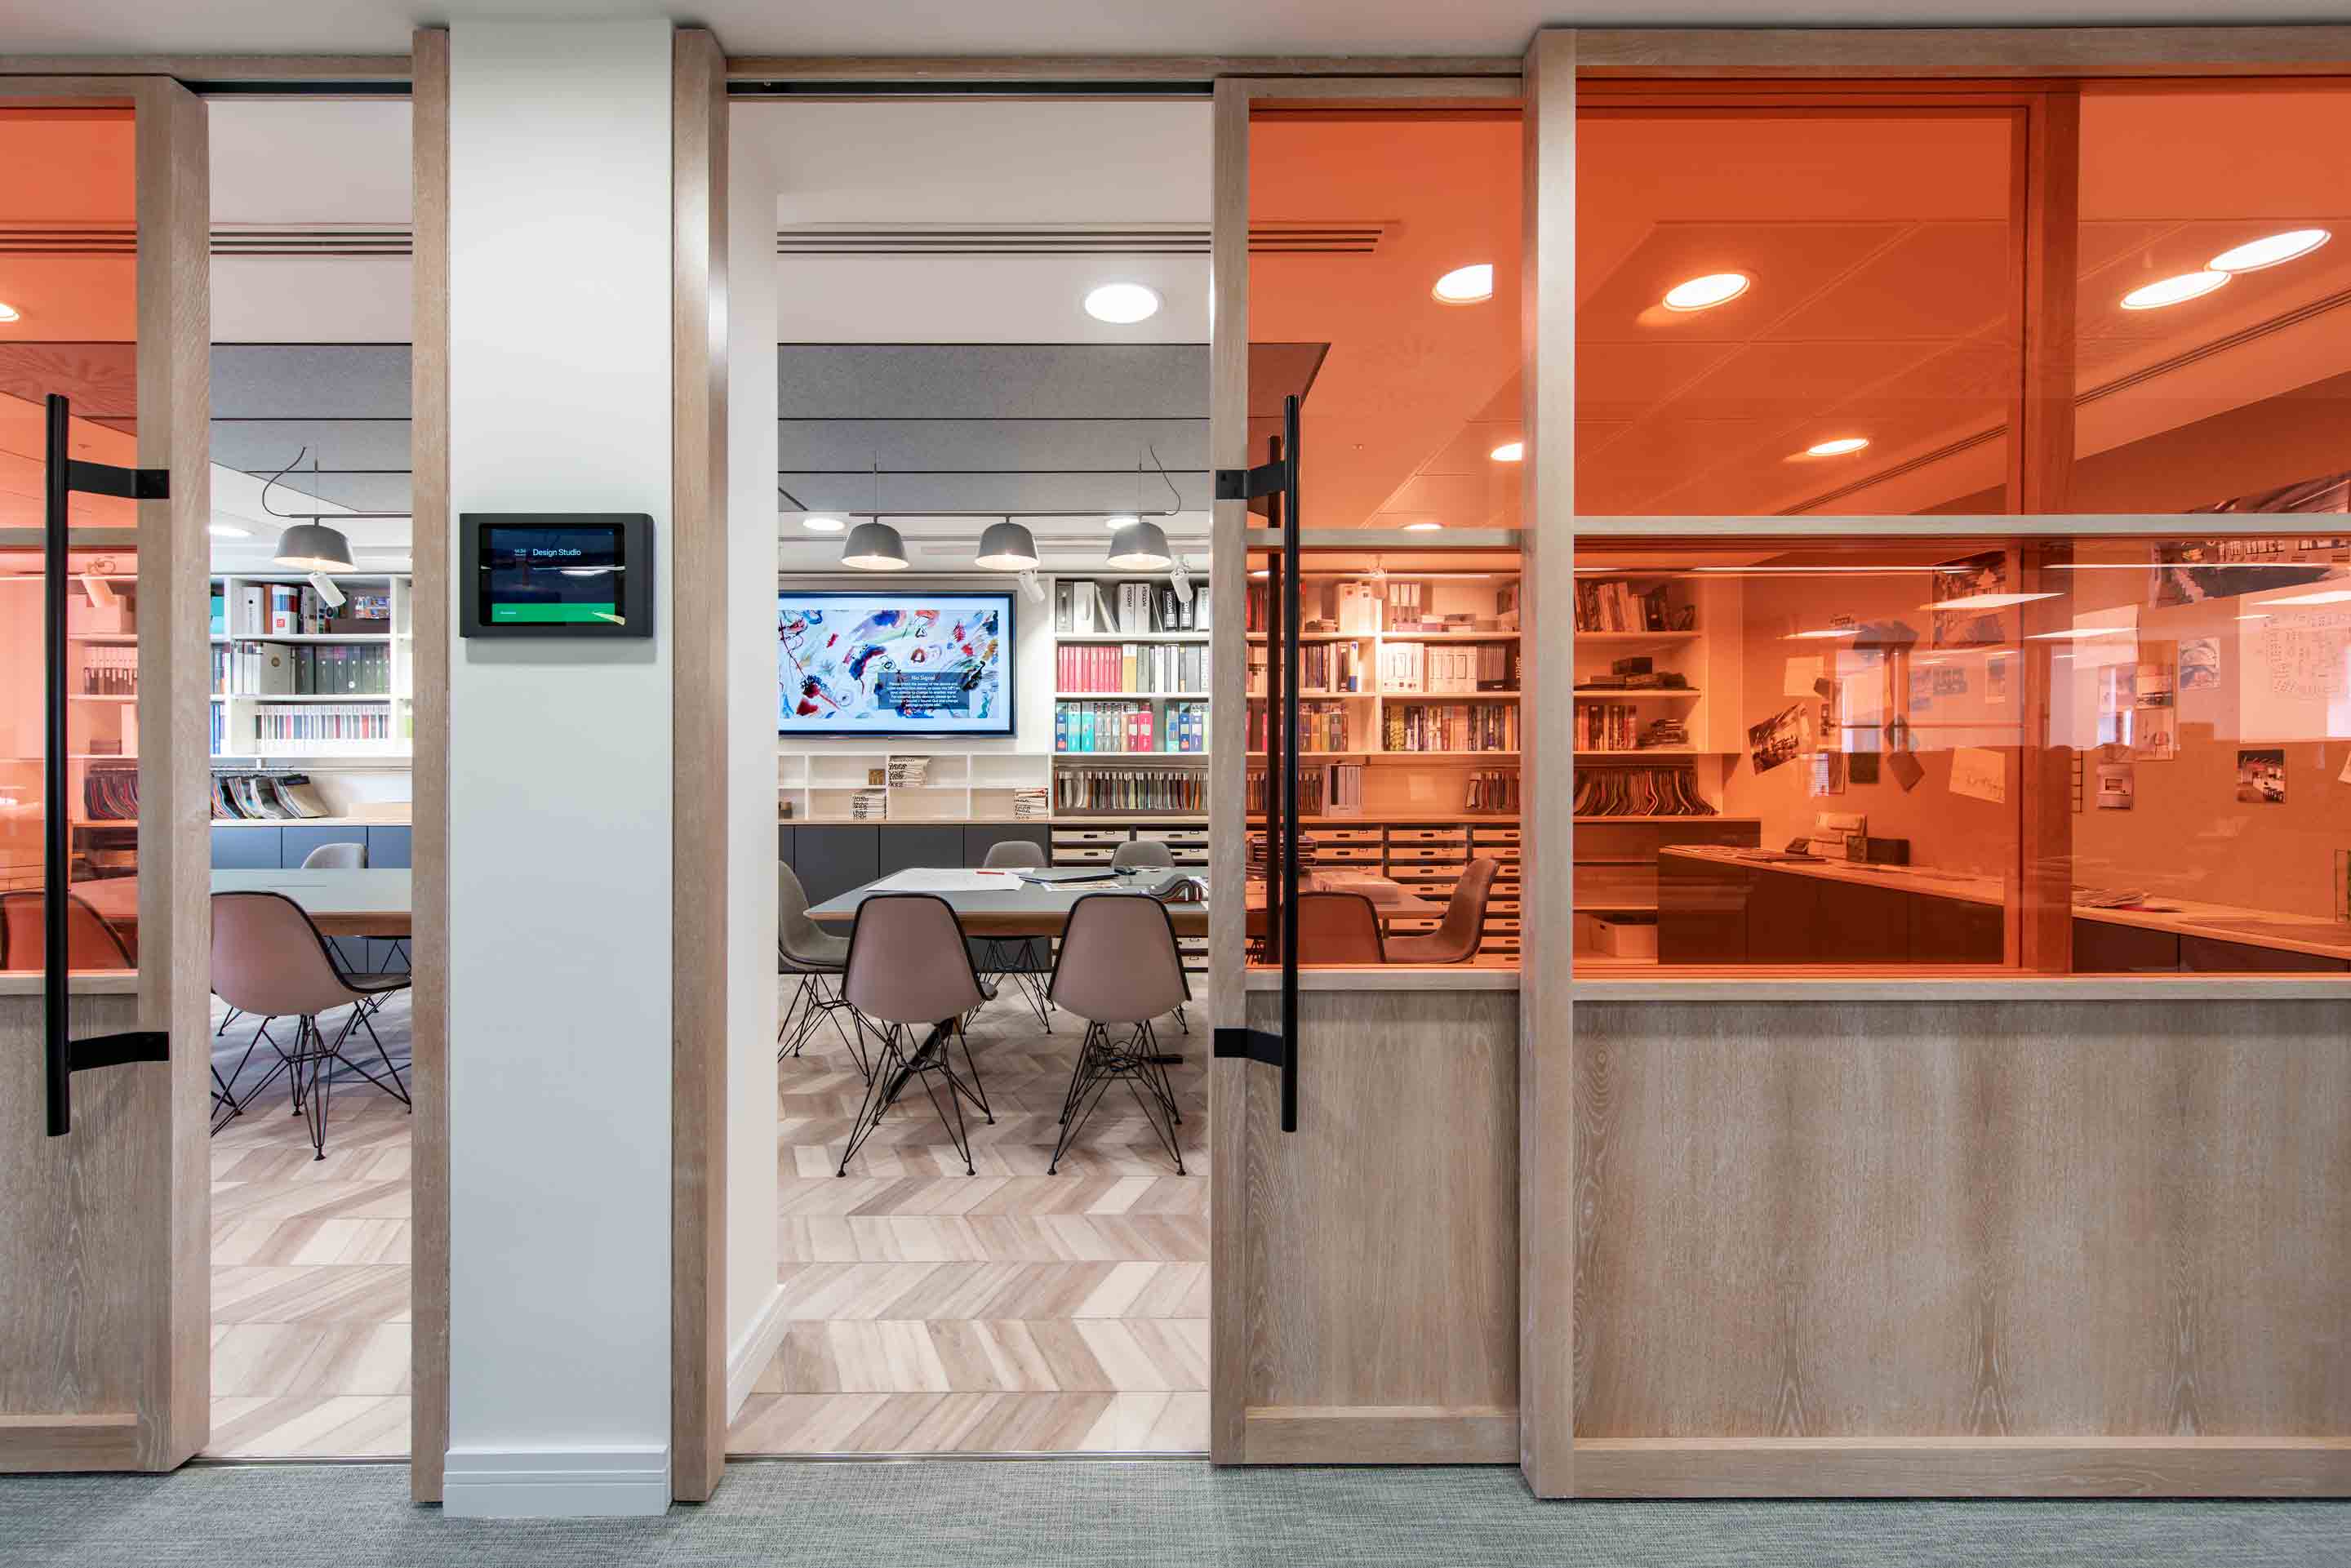 large meeting and design space with adaptable furniture and orange glass doors